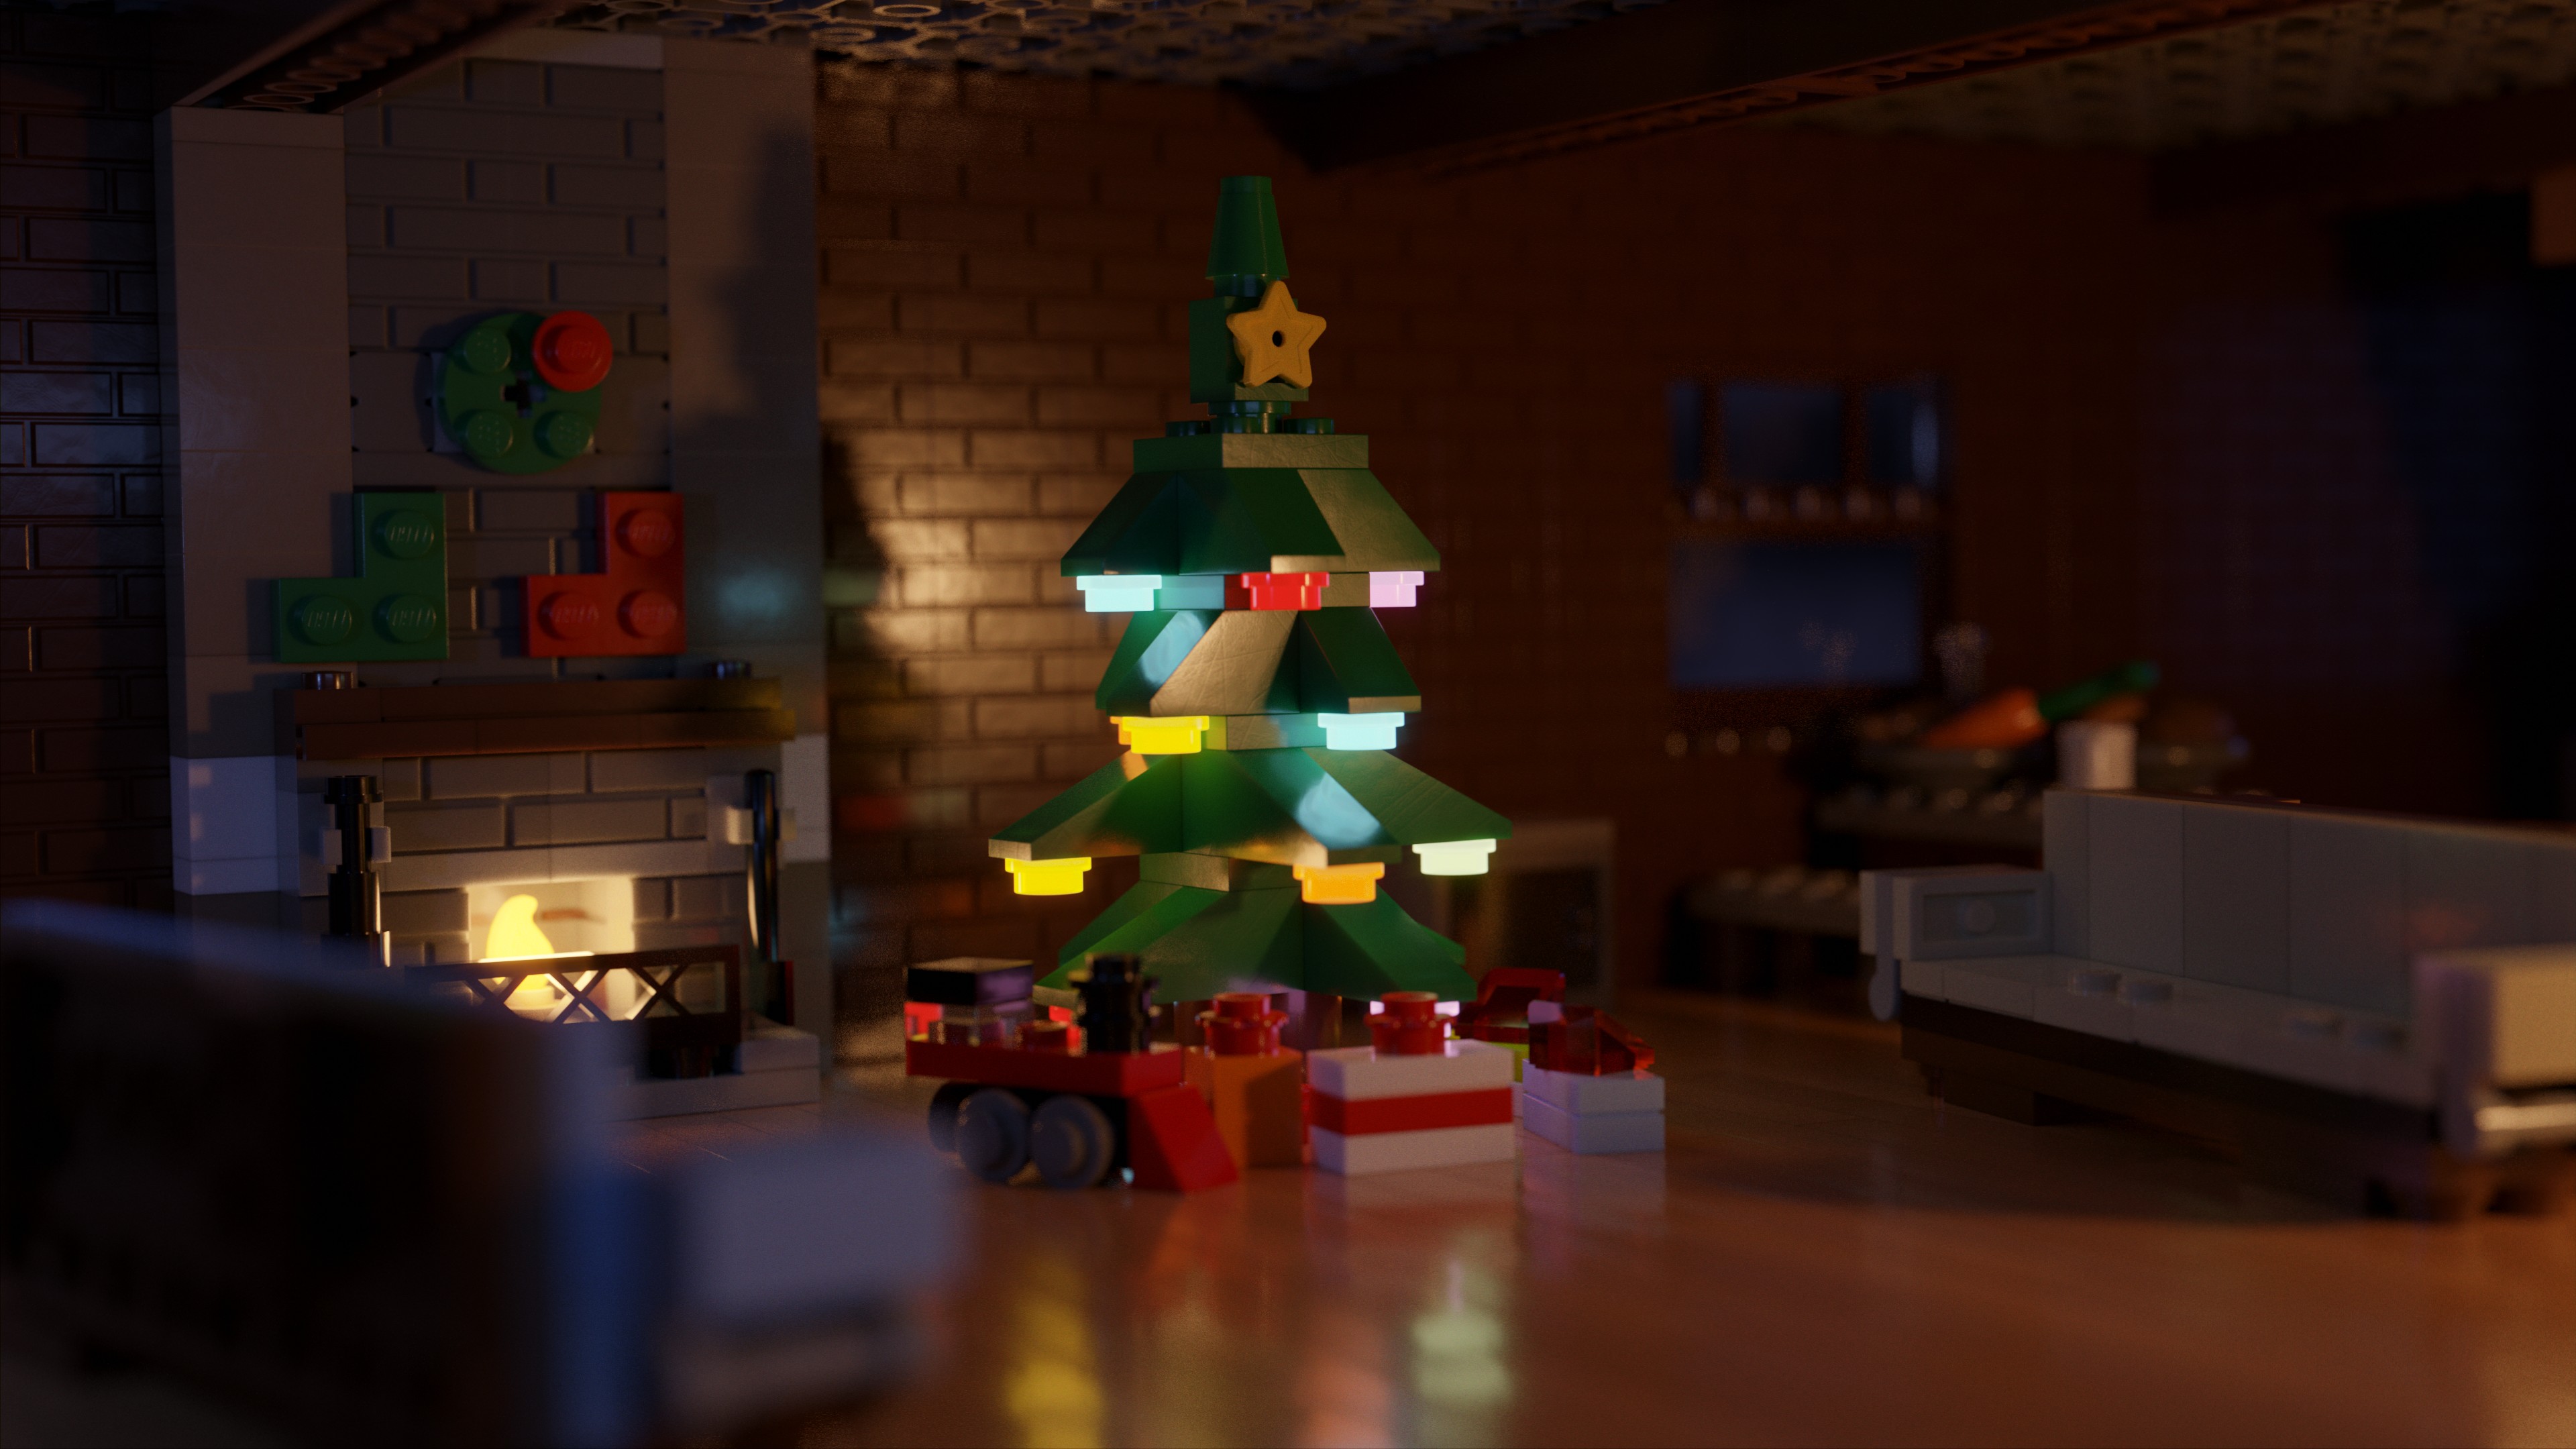 An image of a Lego Christmas tree at night in a living room with presents, sofas and a fireplace.